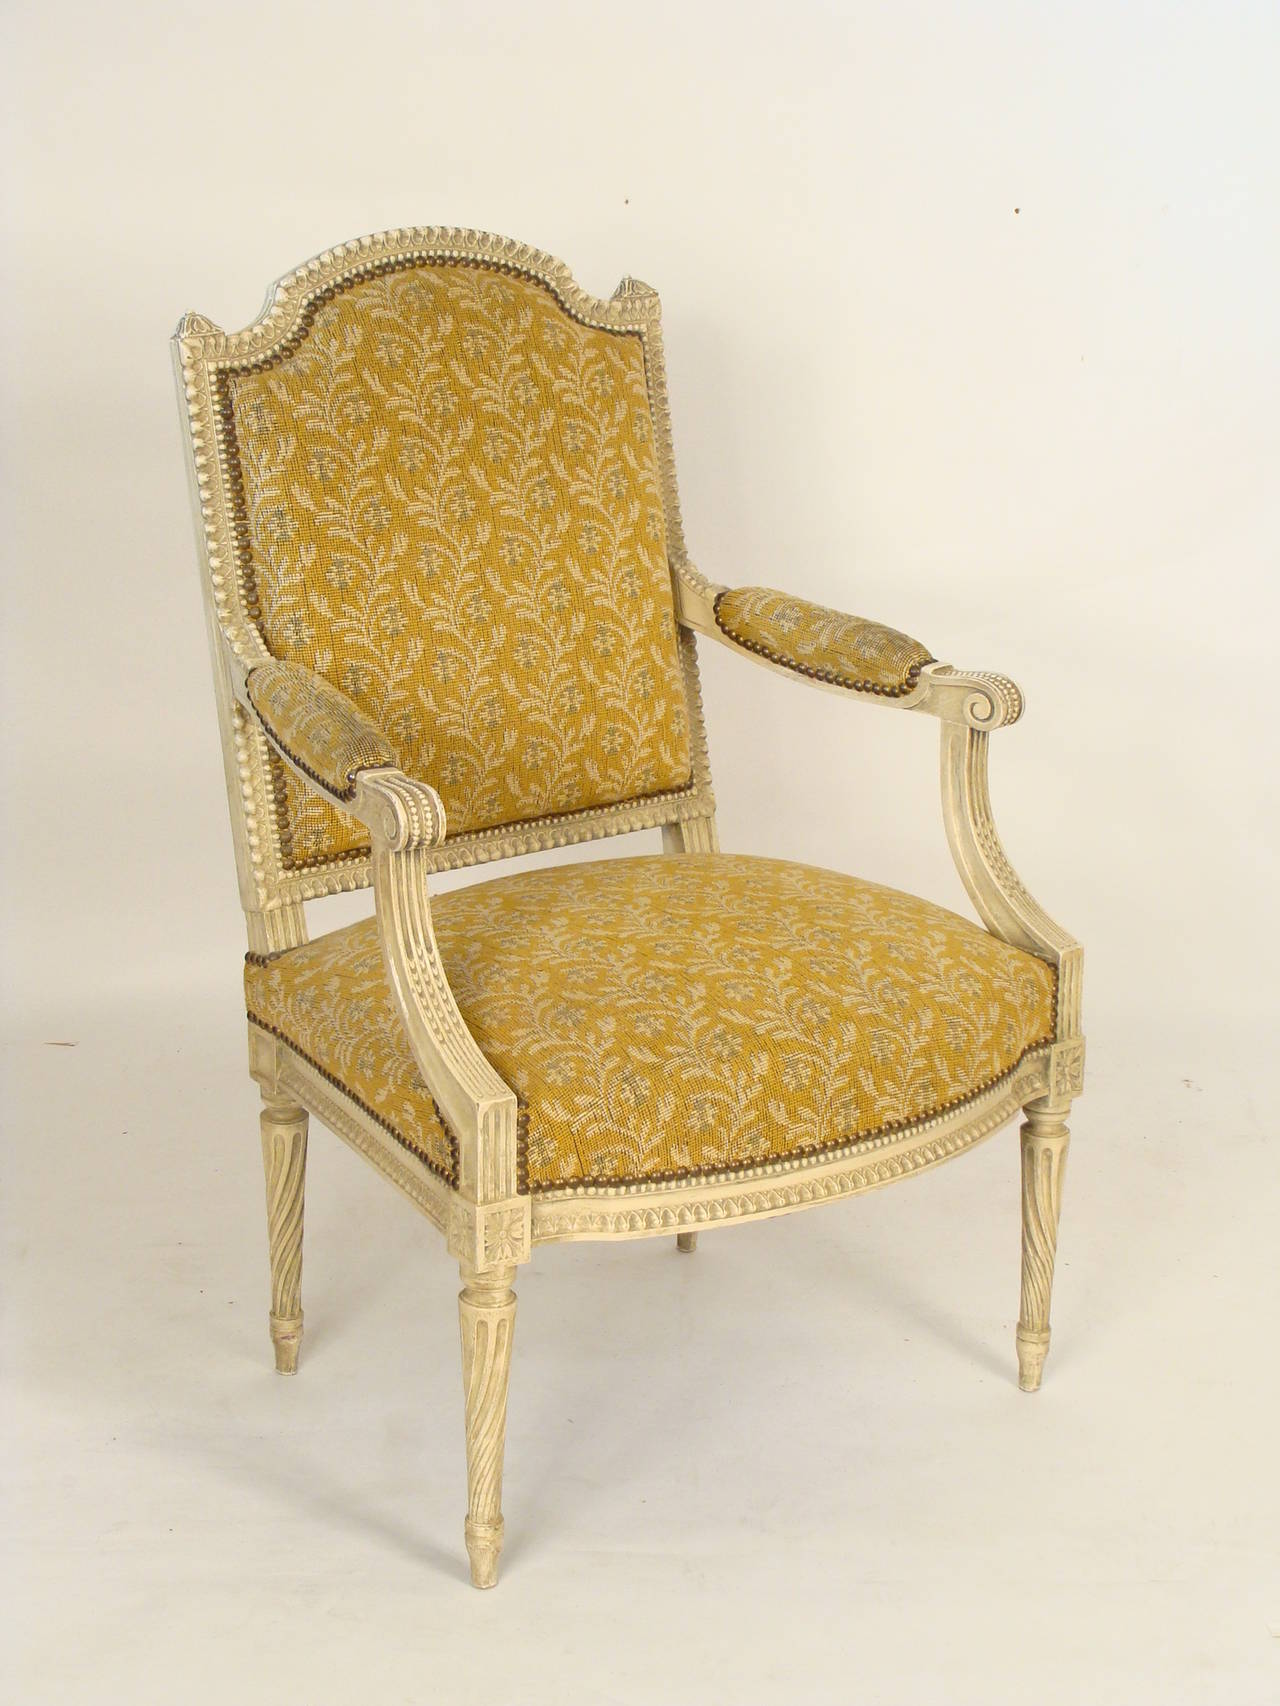 Pair of painted Louis XVI style open armchairs, approximately 50 years old.